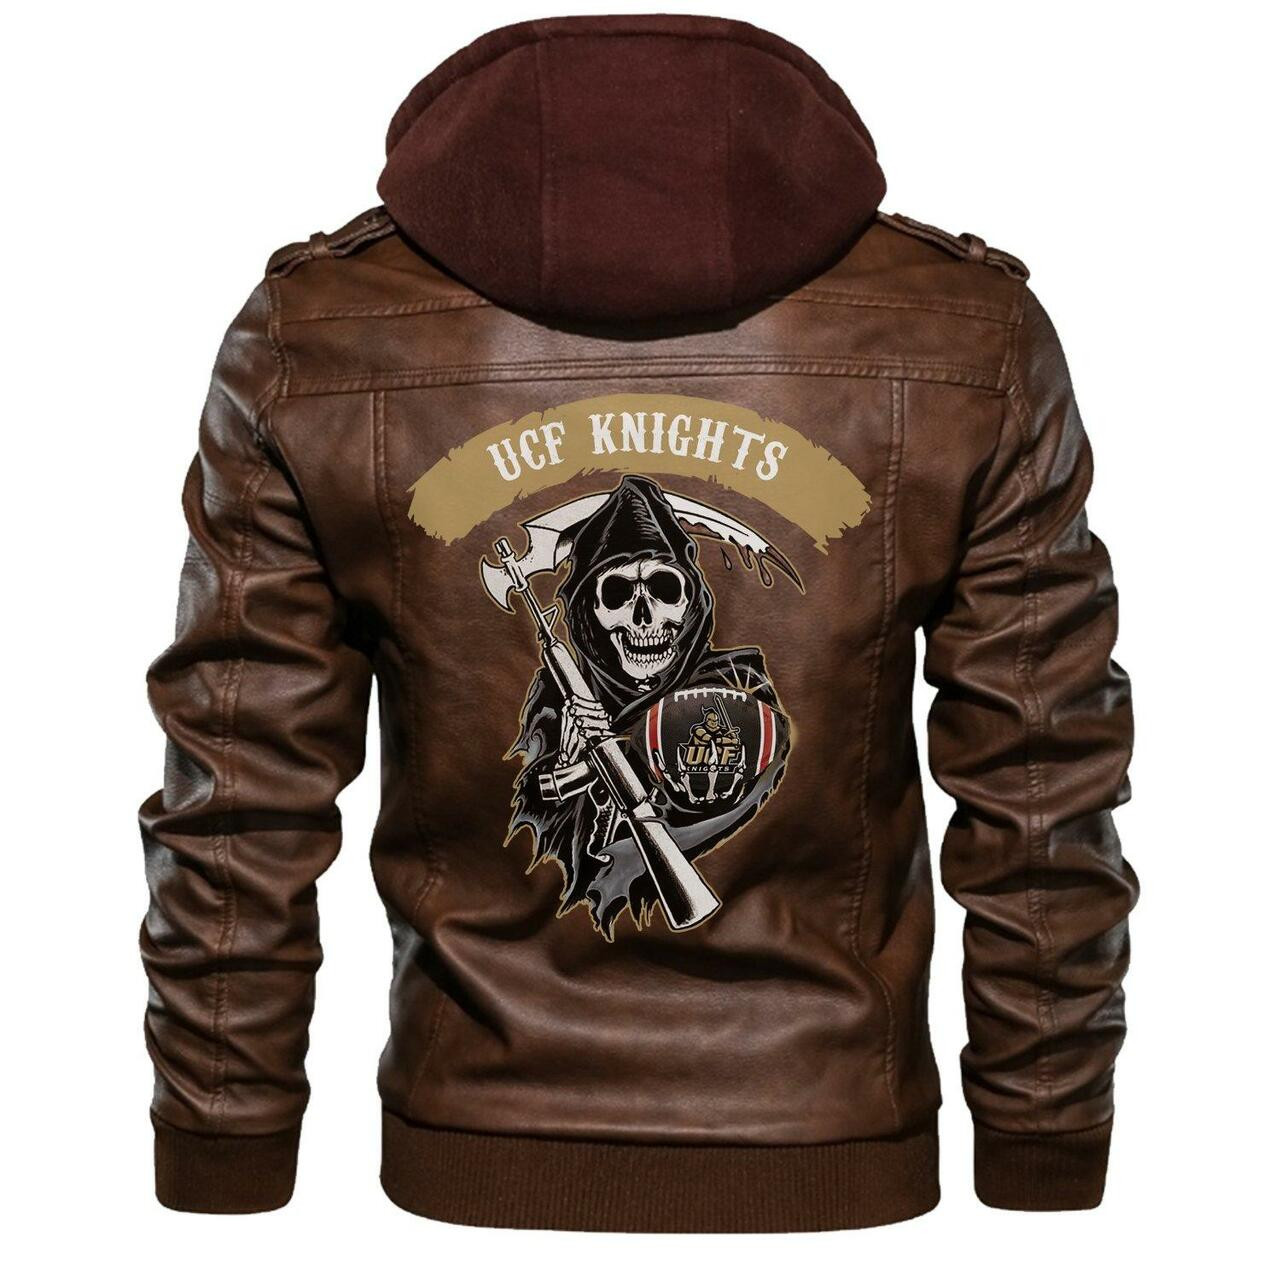 Don't wait another minute, Get Hot Leather Jacket today 130